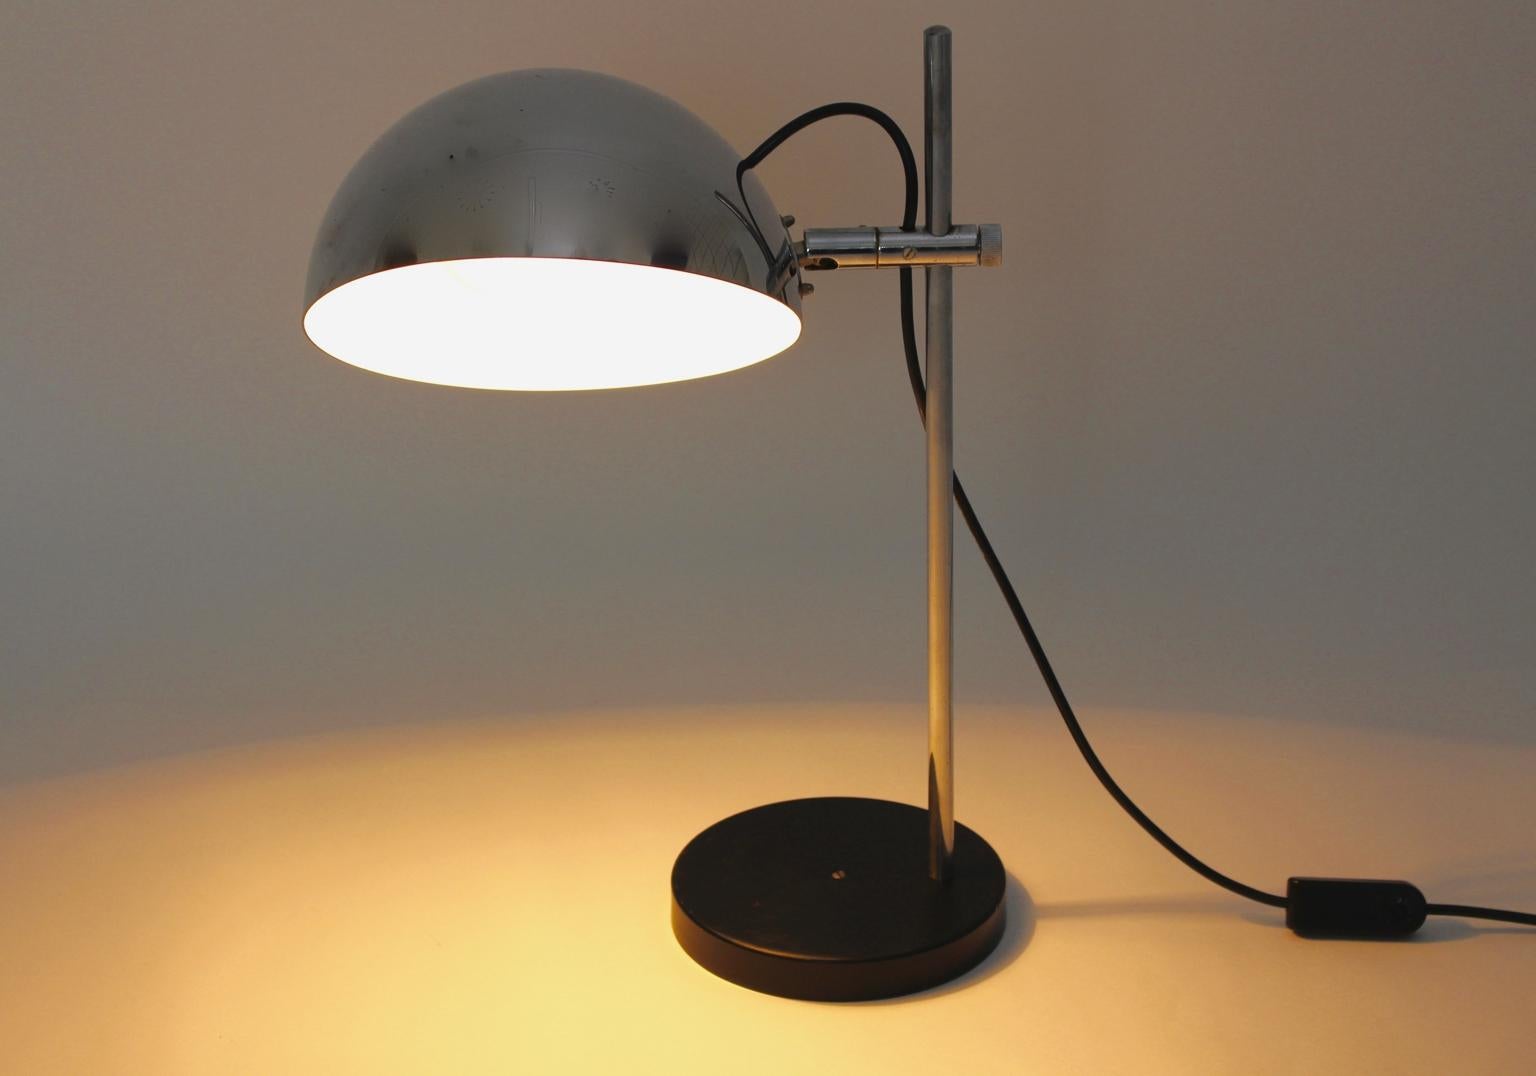 Mid-20th Century Mid-Century Modern Vintage Chromed Table Lamp by Omi Elux 1960 Germany For Sale